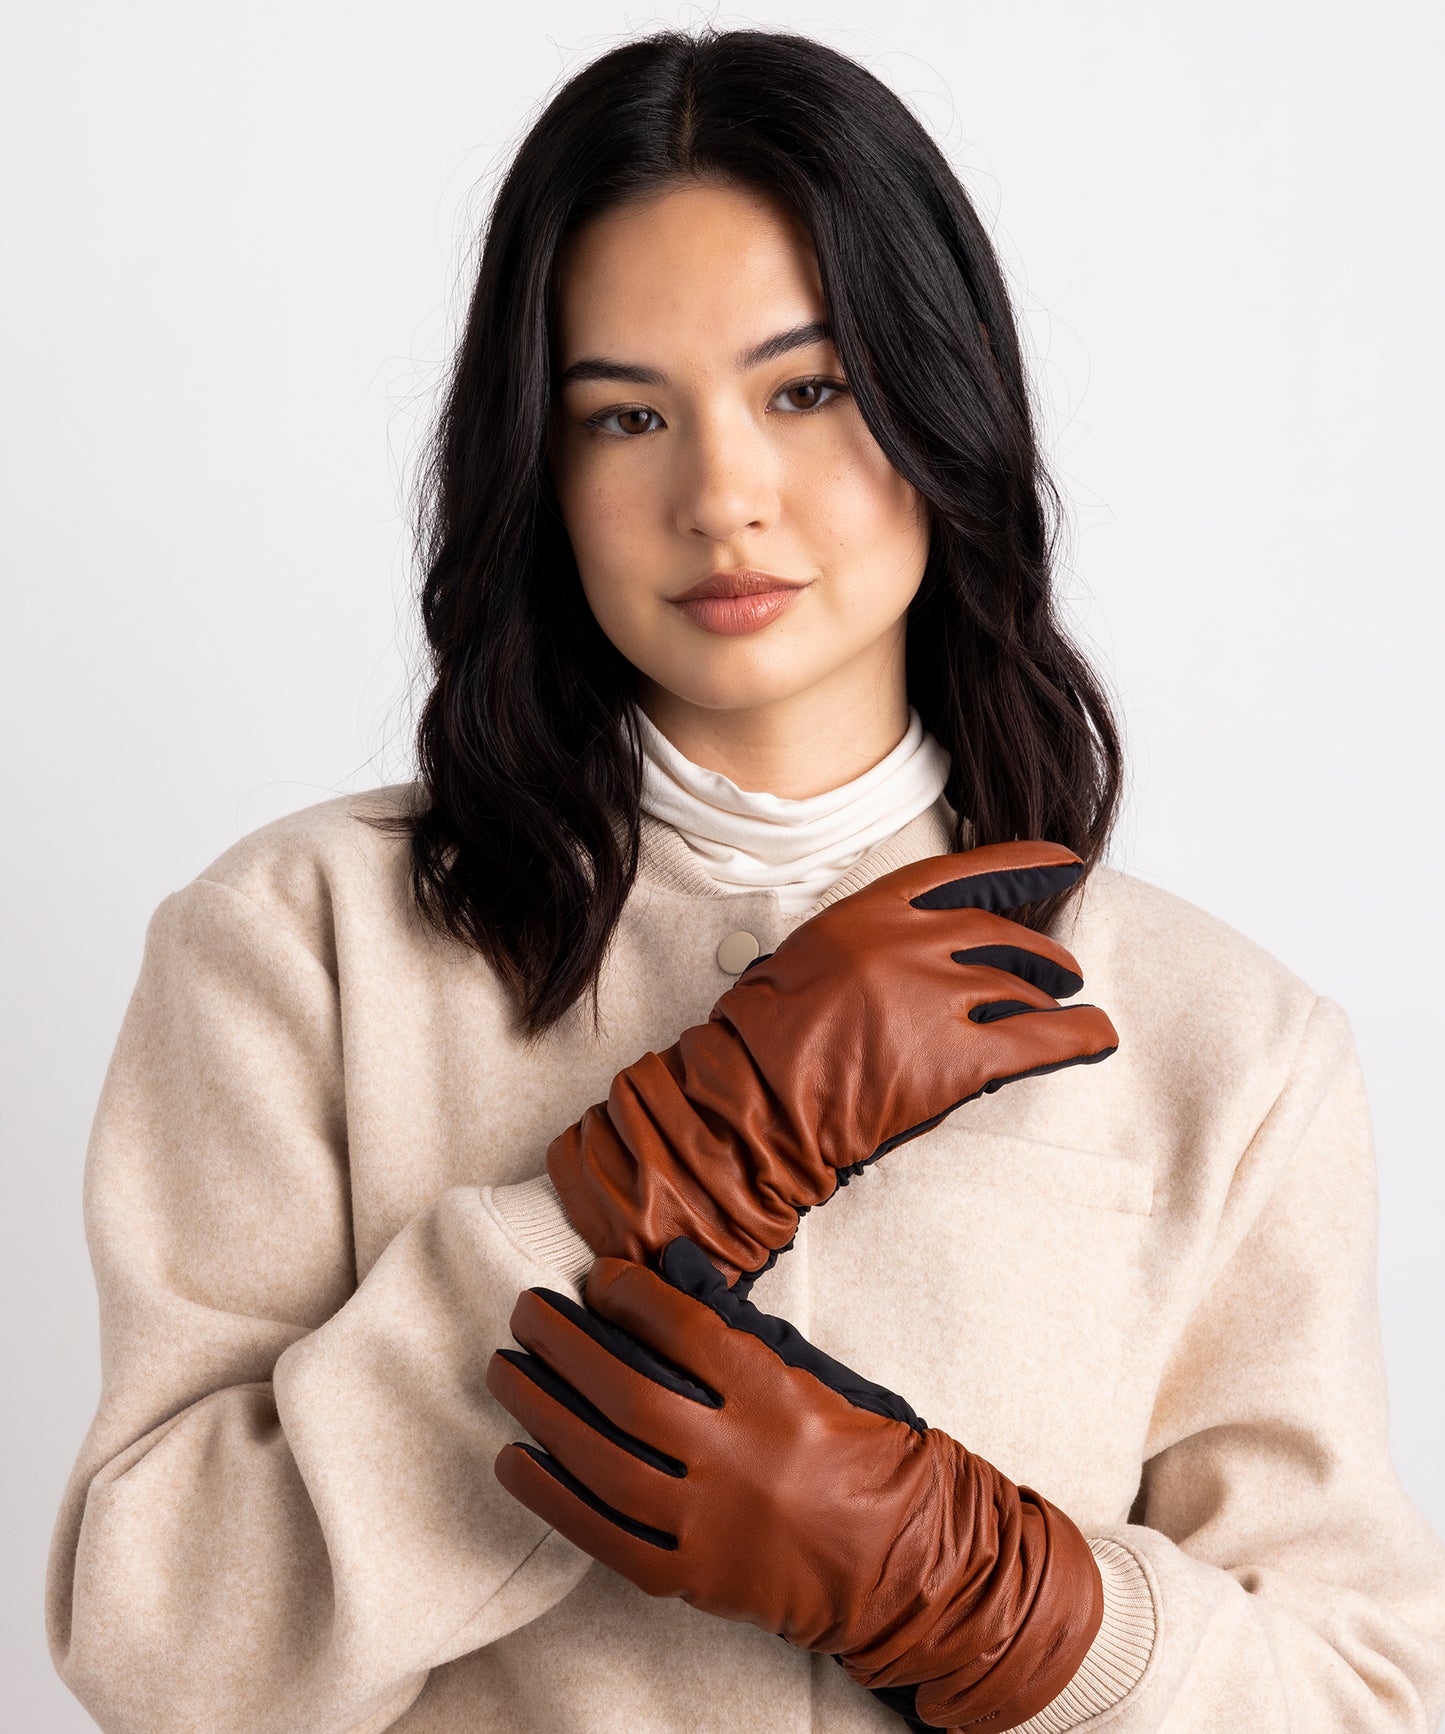 Ruched Leather Glove in color Chestnut on a model